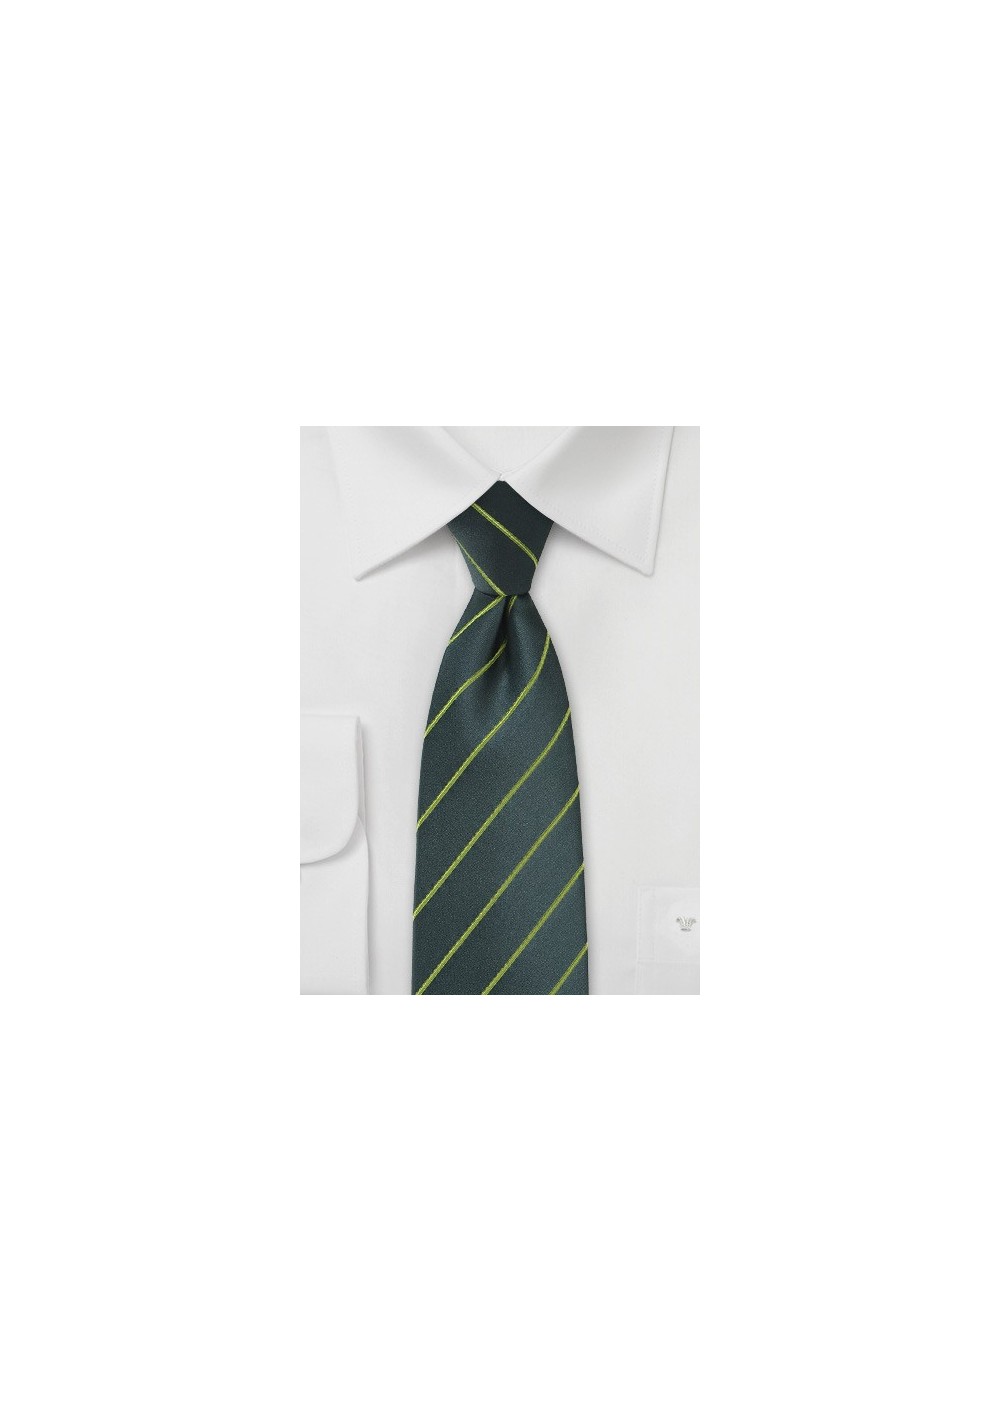 Dark Hunter Green and Lime Striped Tie